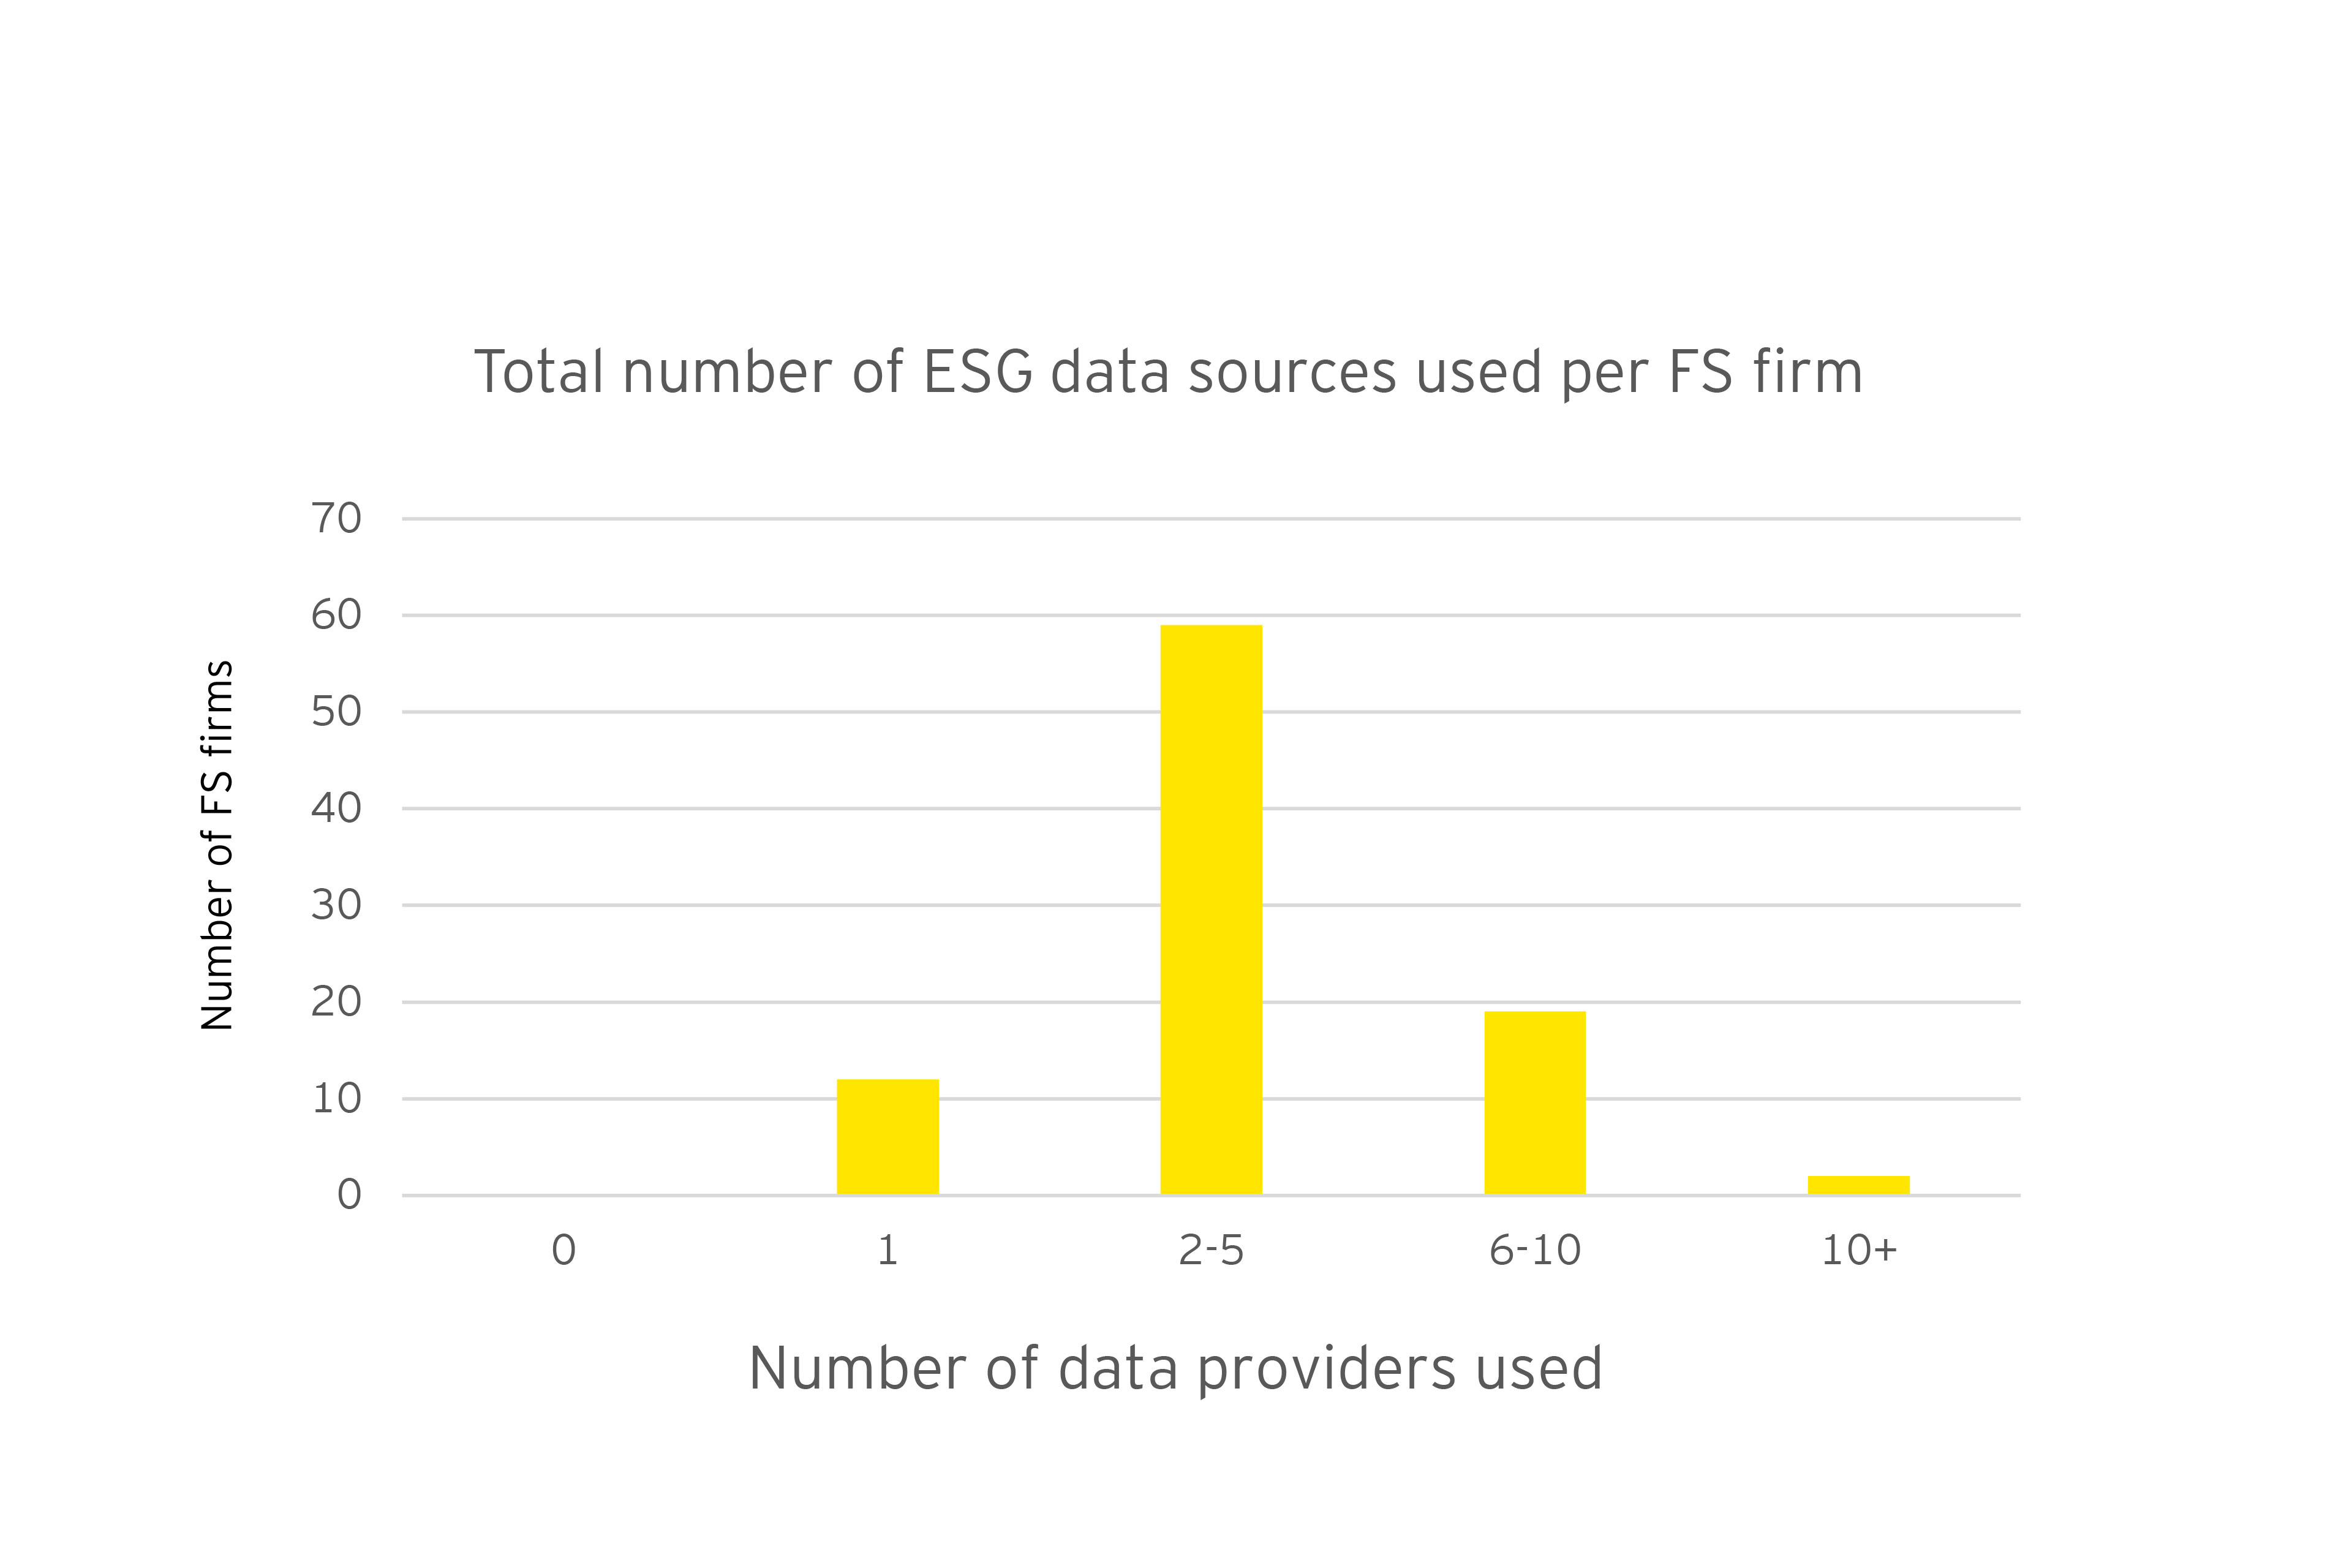 Total number of ESG data sources used per financial services firm